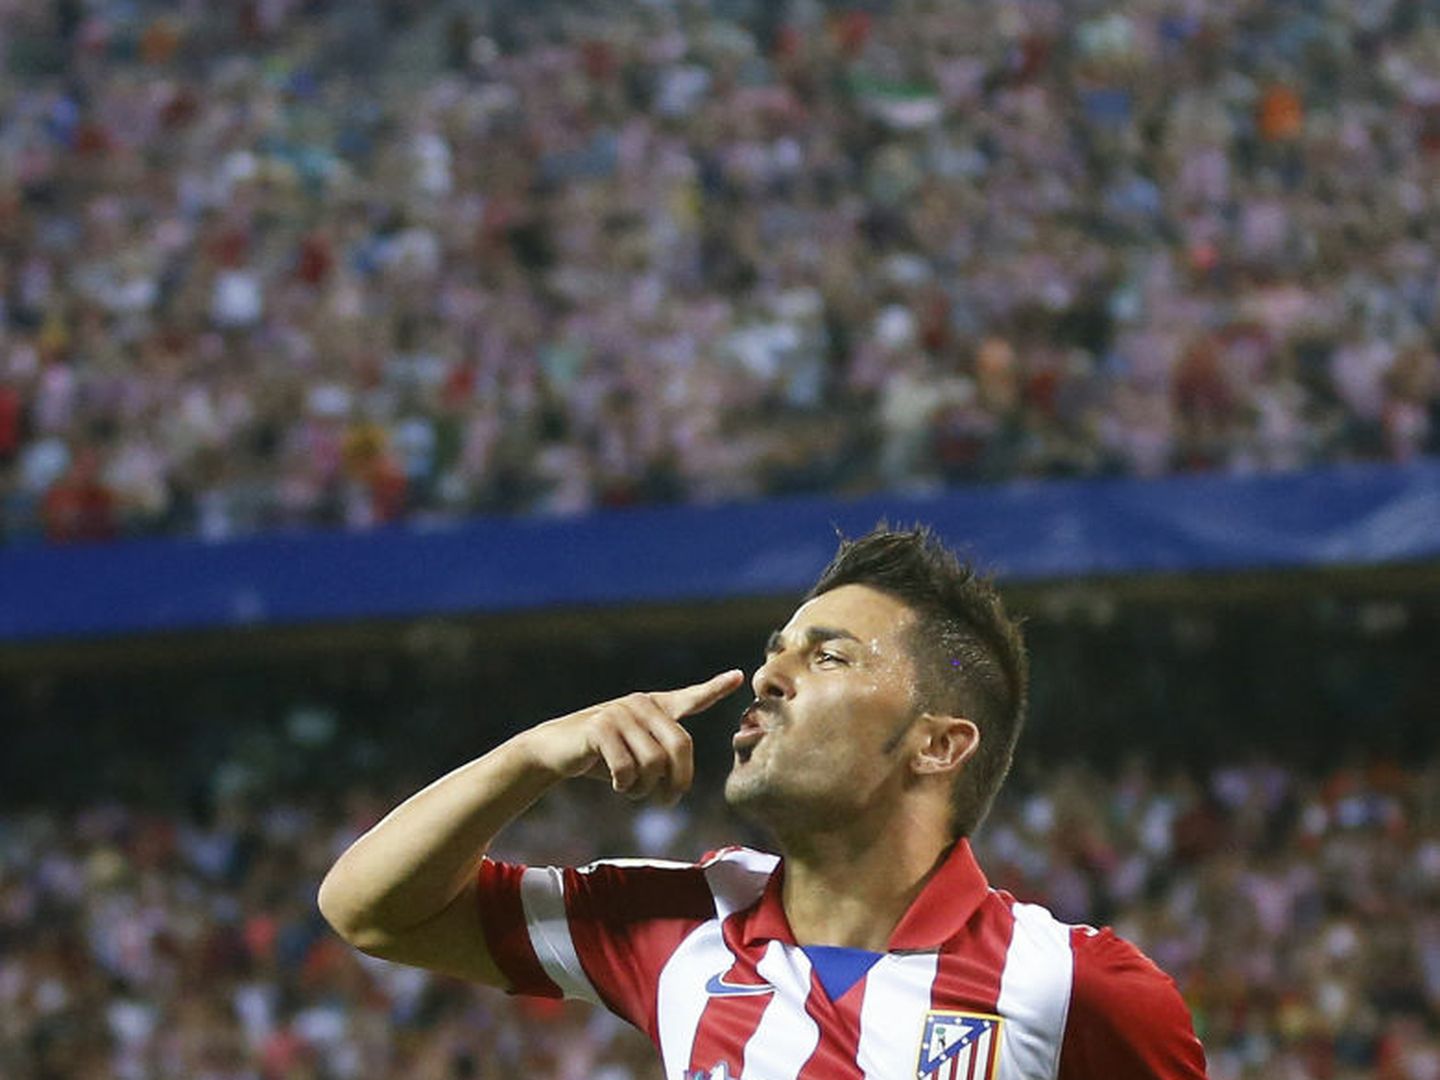 Atletico madrid's david villa celebrates his goal during their spanish supercup first leg soccer match against barcelona at the vicente calderon stadium in madrid